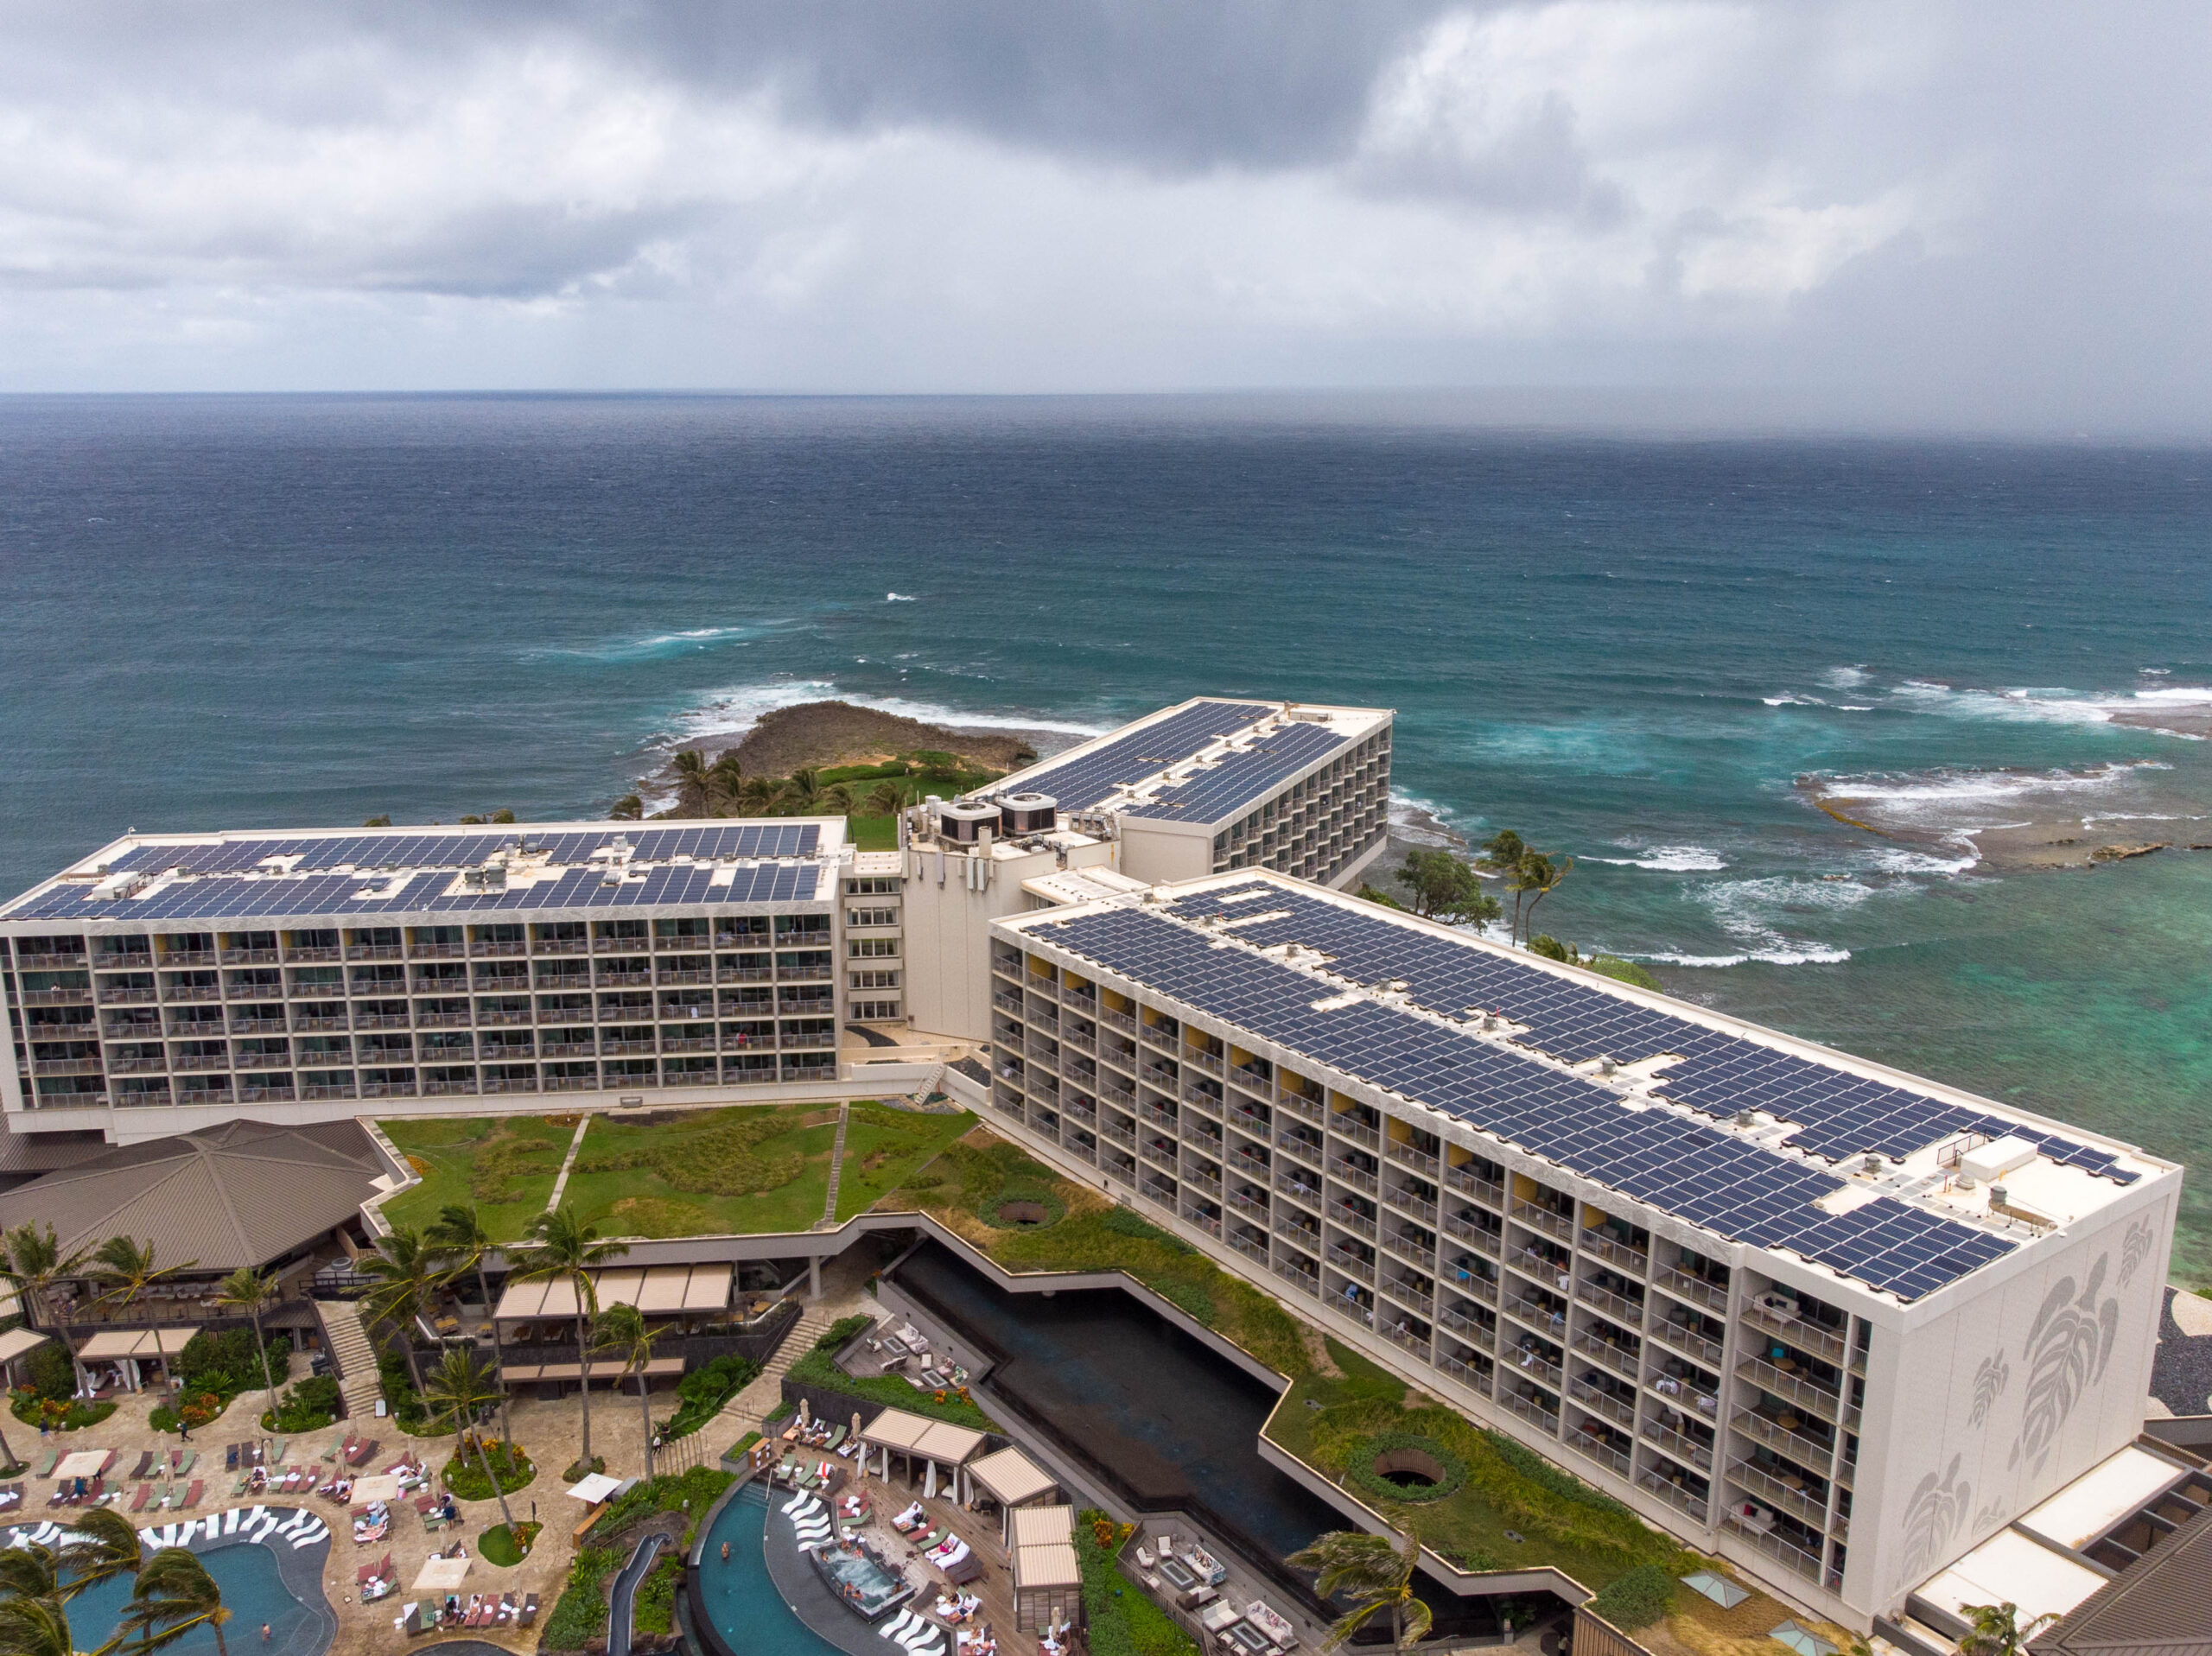 Oceanside resort featuring solar panels installed by Adon Renewables on the roof.